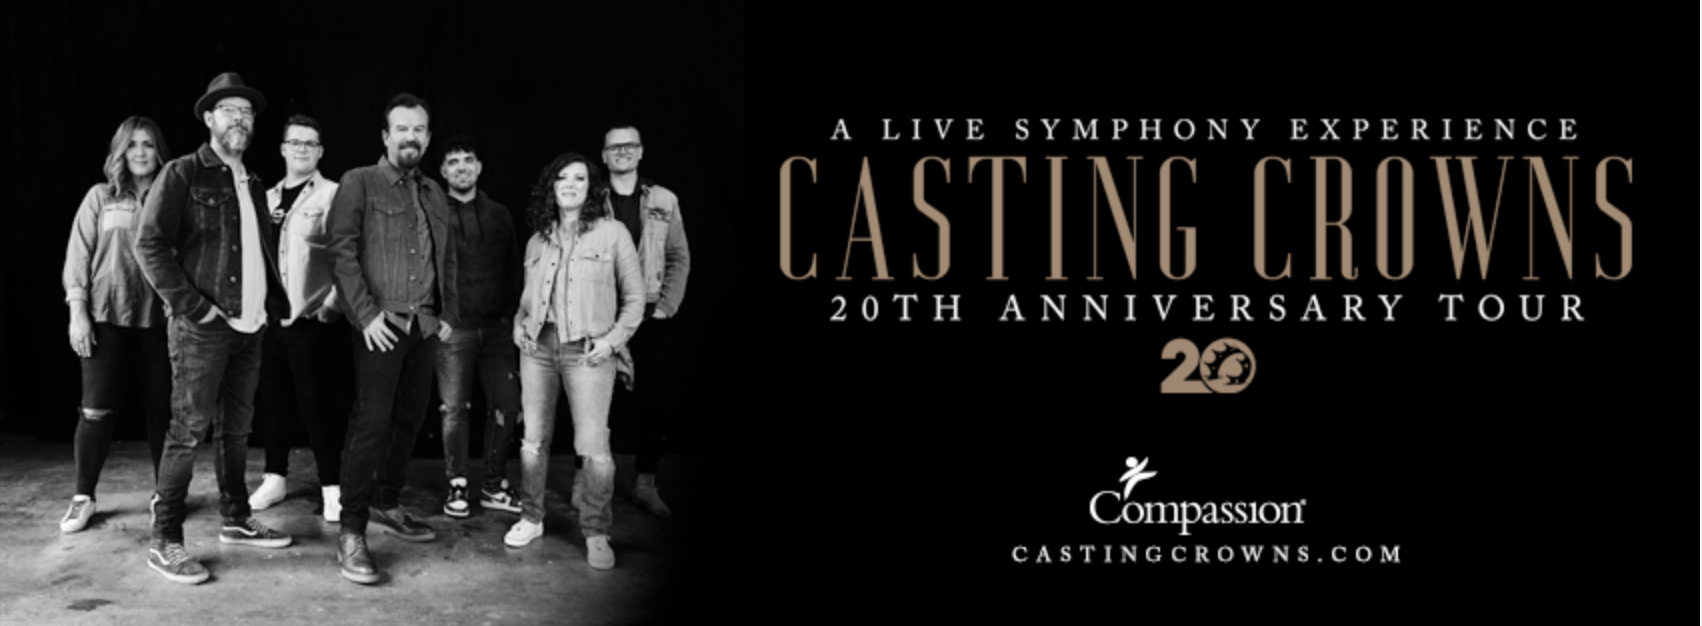 Casting Crowns - 20th Anniversary